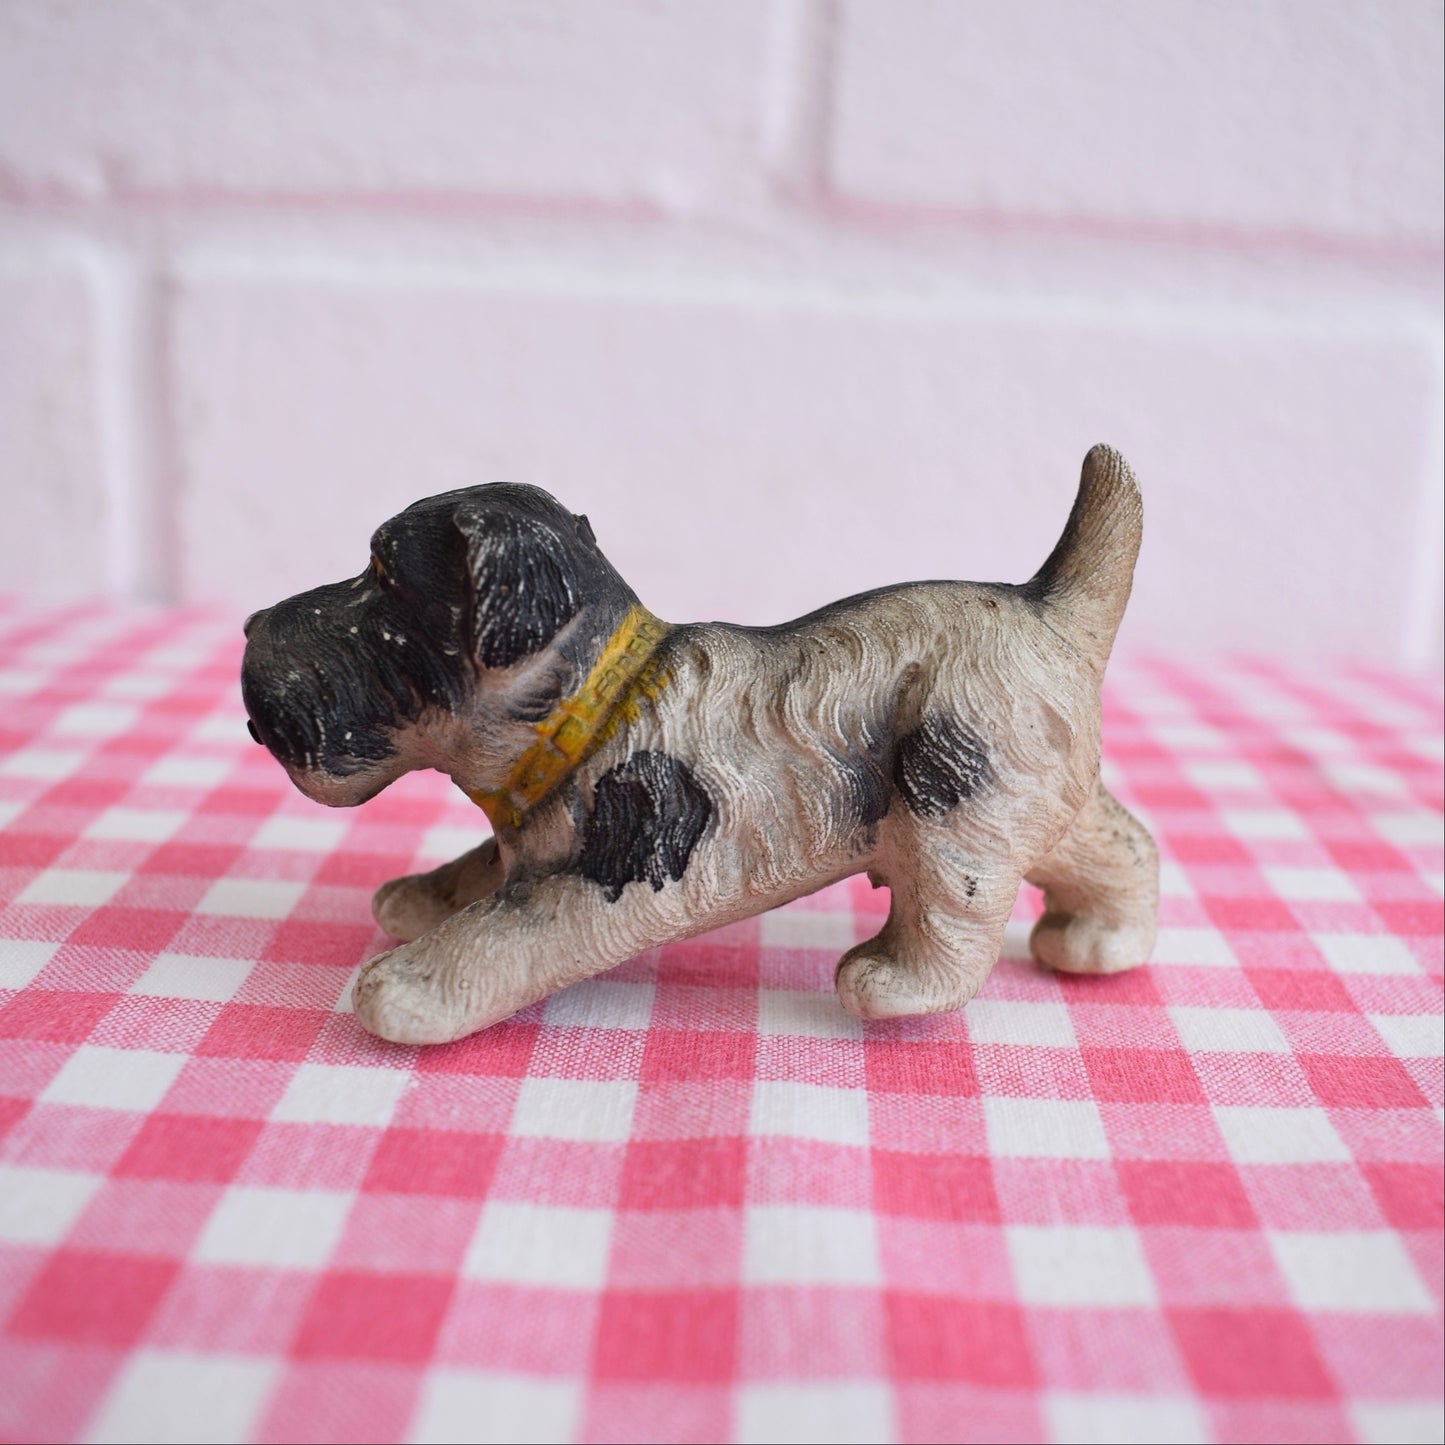 Vintage 1940s Small Metal Scotty Dog / Plastic Terrier